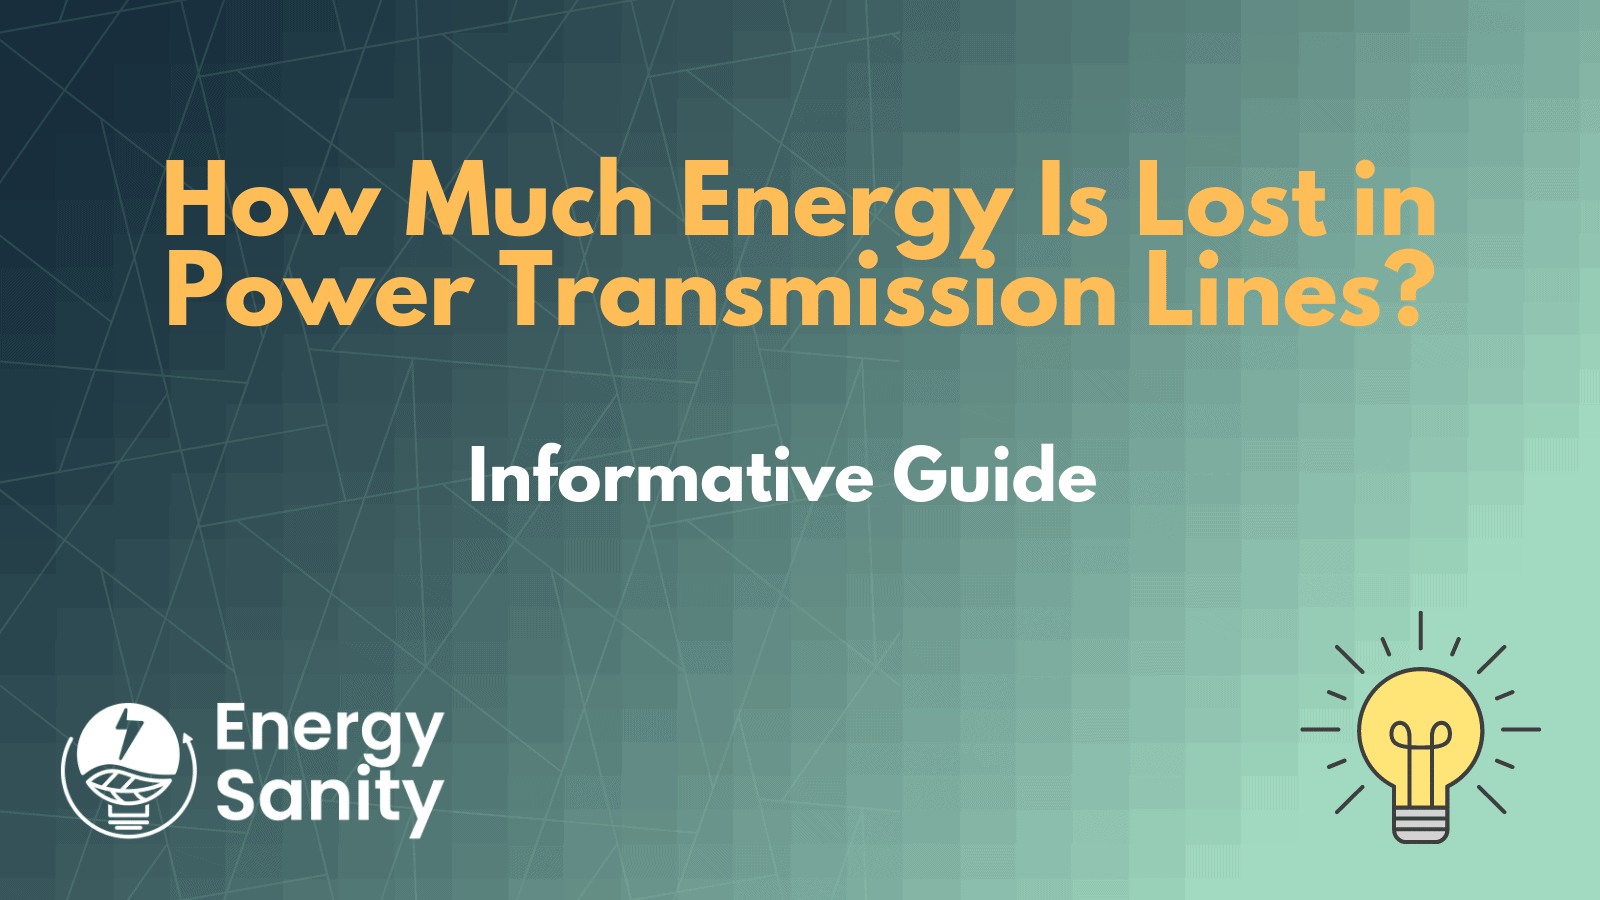 why is energy lost in power transmission lines